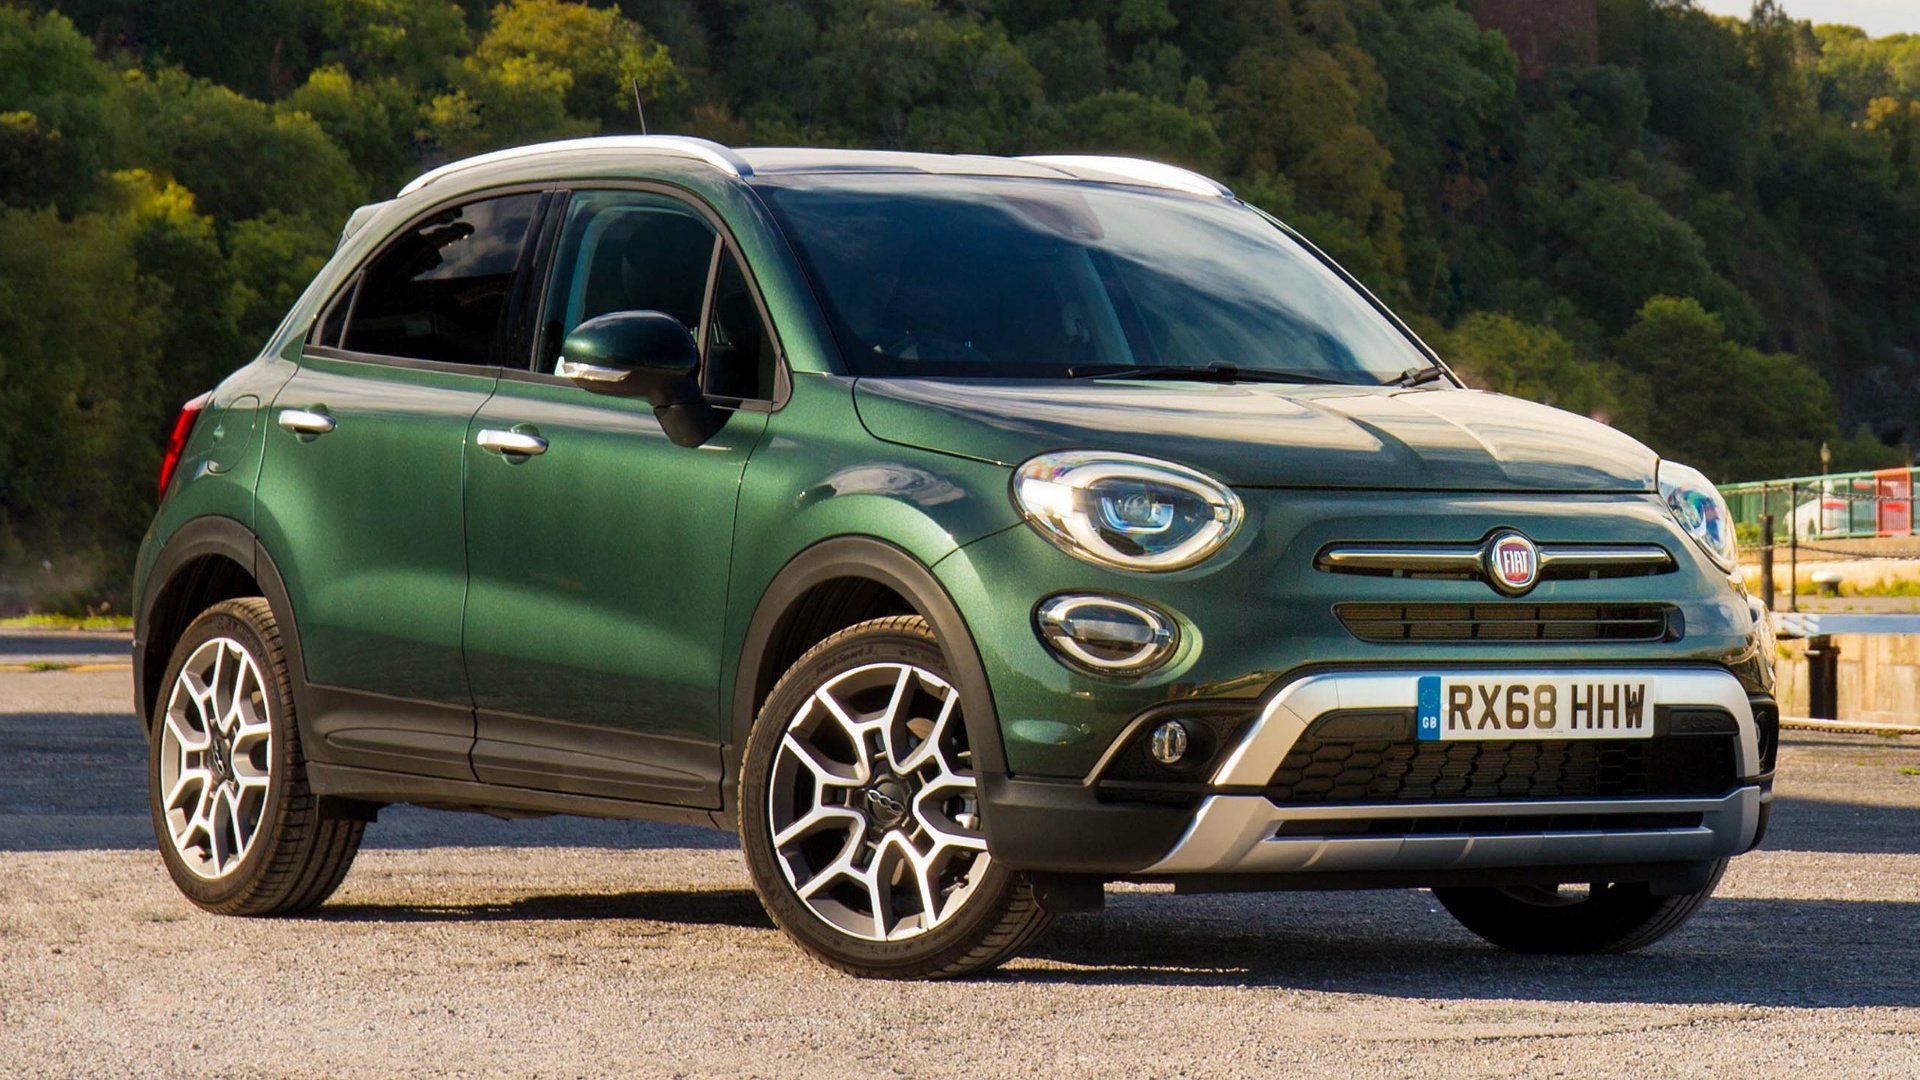 Top 40+ images fiat 500x green - In.thptnganamst.edu.vn